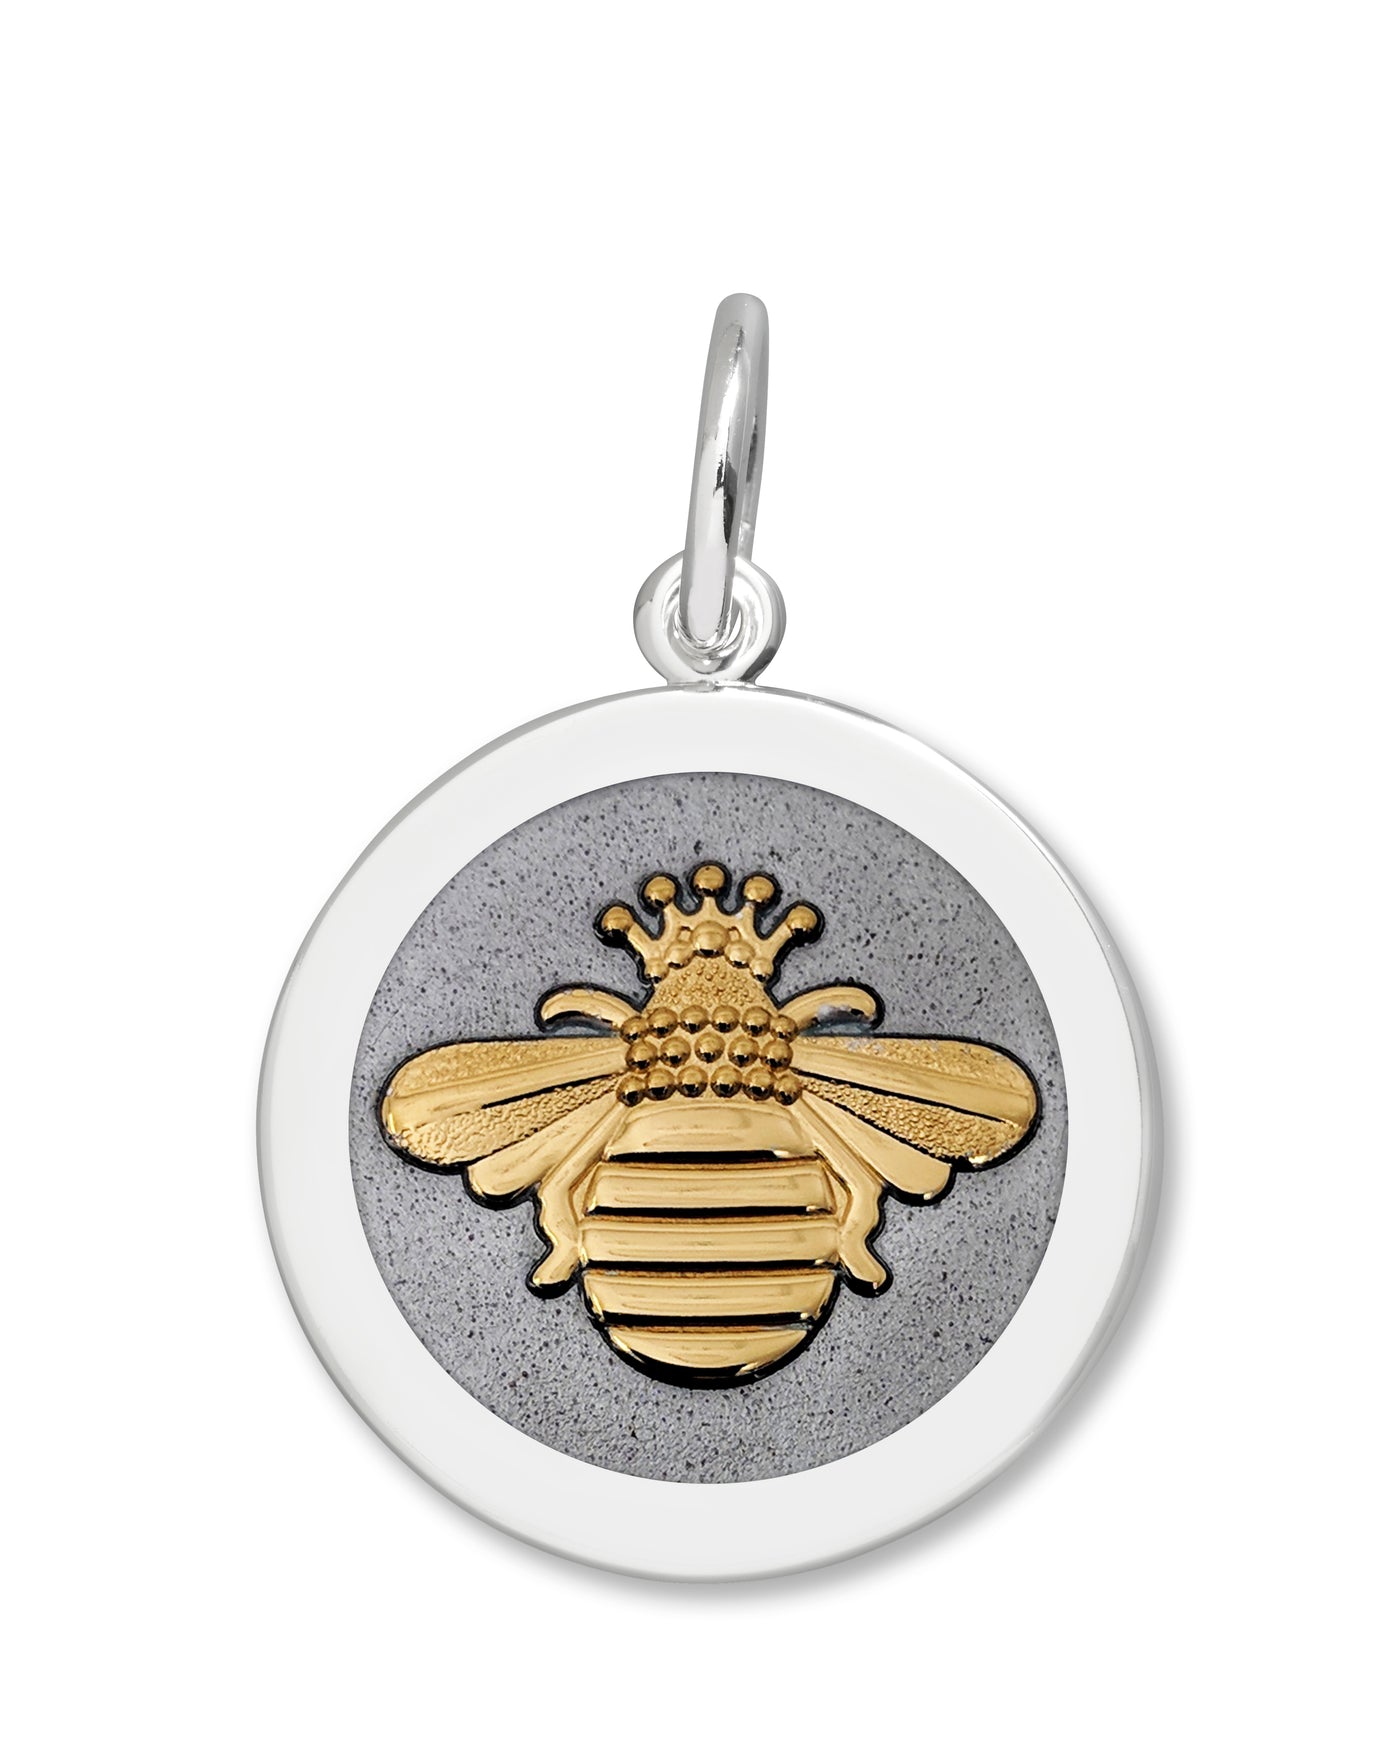 Lola & Company Jewelry Queen Bee Pendant Gold in Pewter